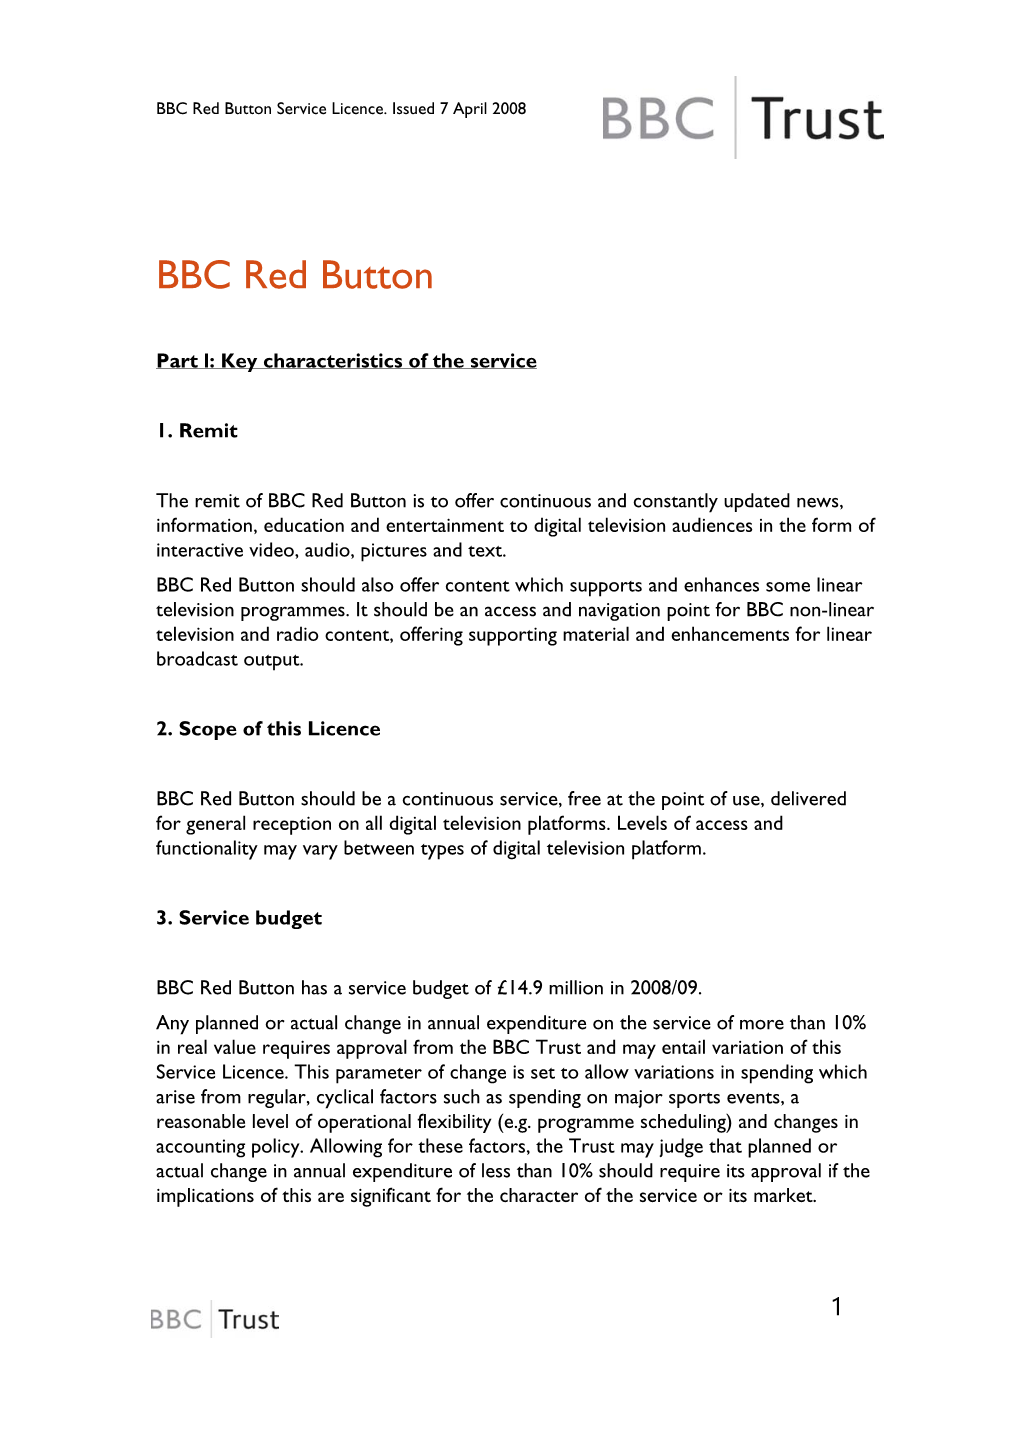 BBC Trust and May Entail Variation of This Service Licence